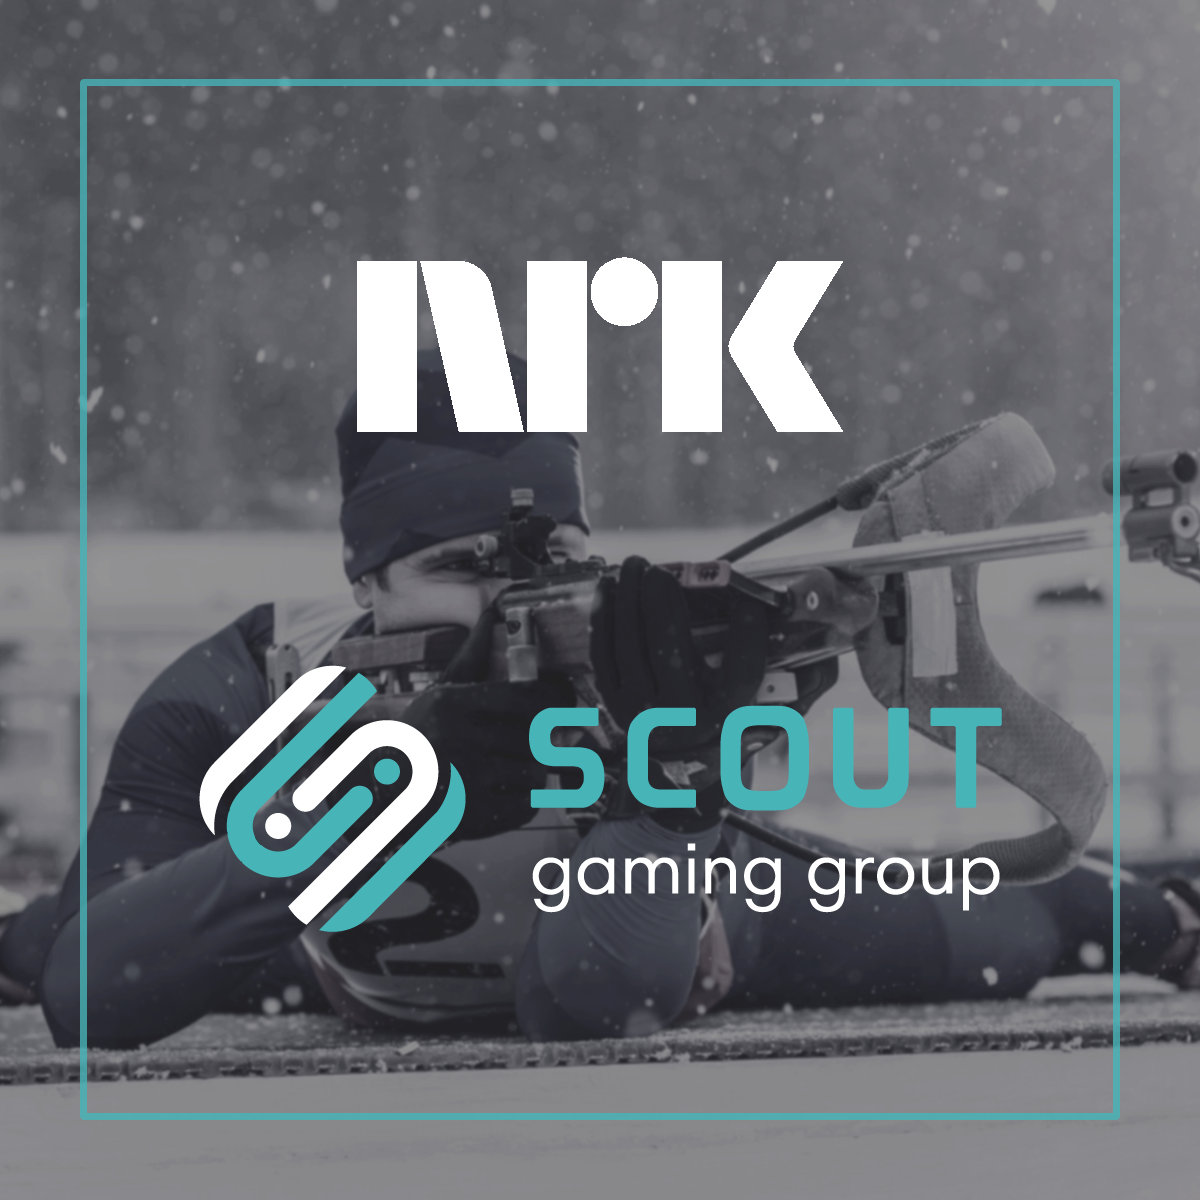 Scout Gaming further strengthens relationship with NRK